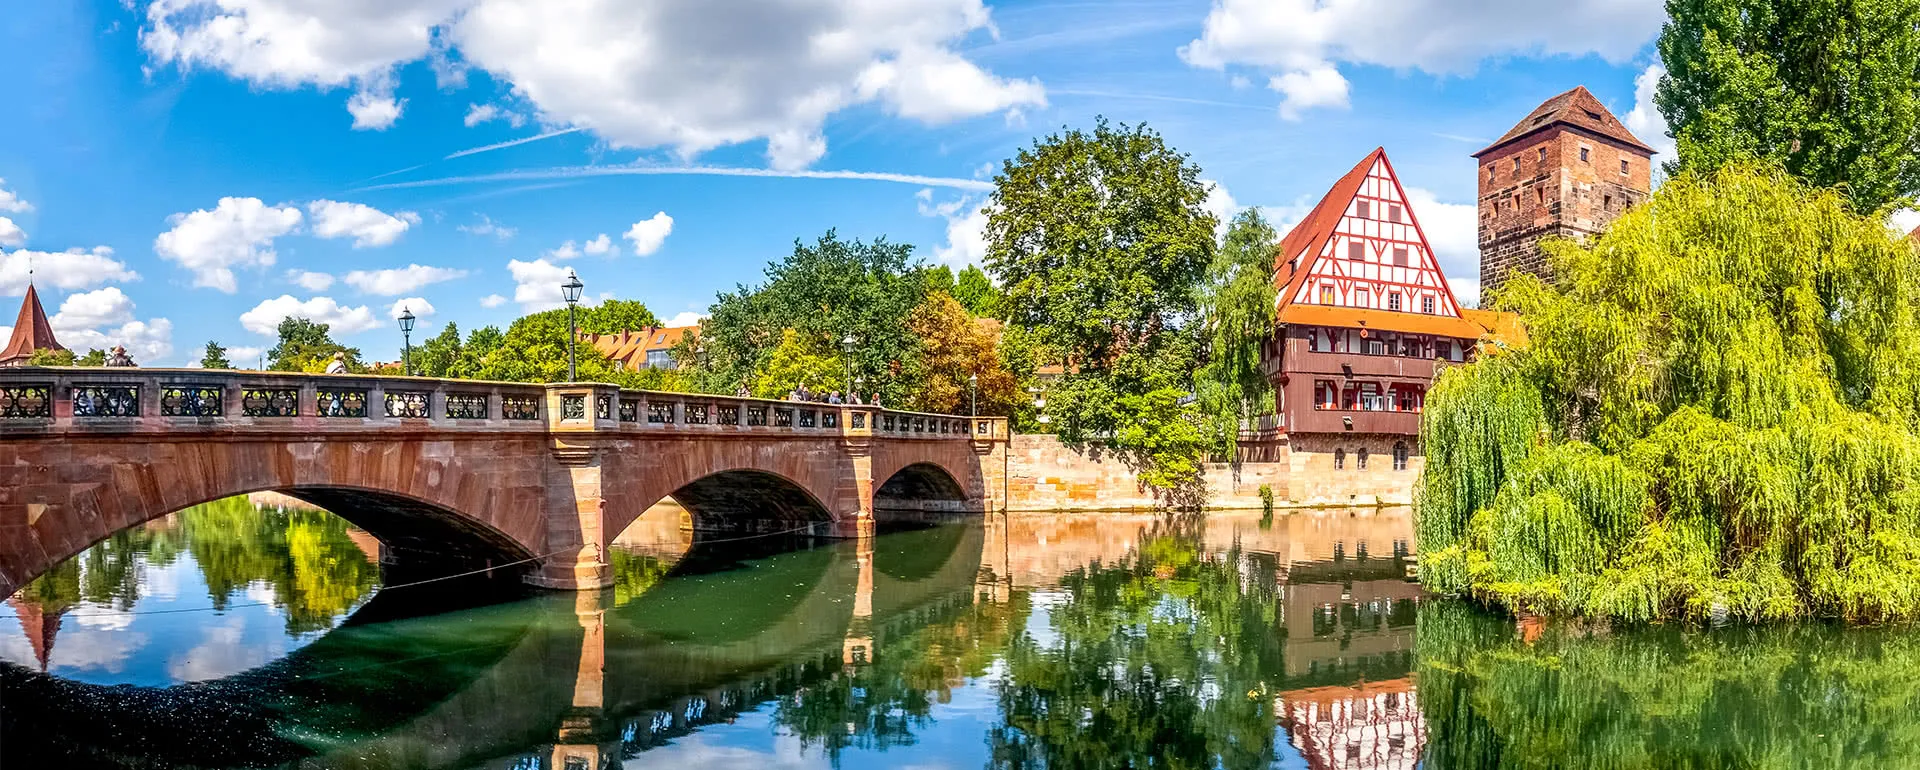 Nuremberg - the destination for group trips